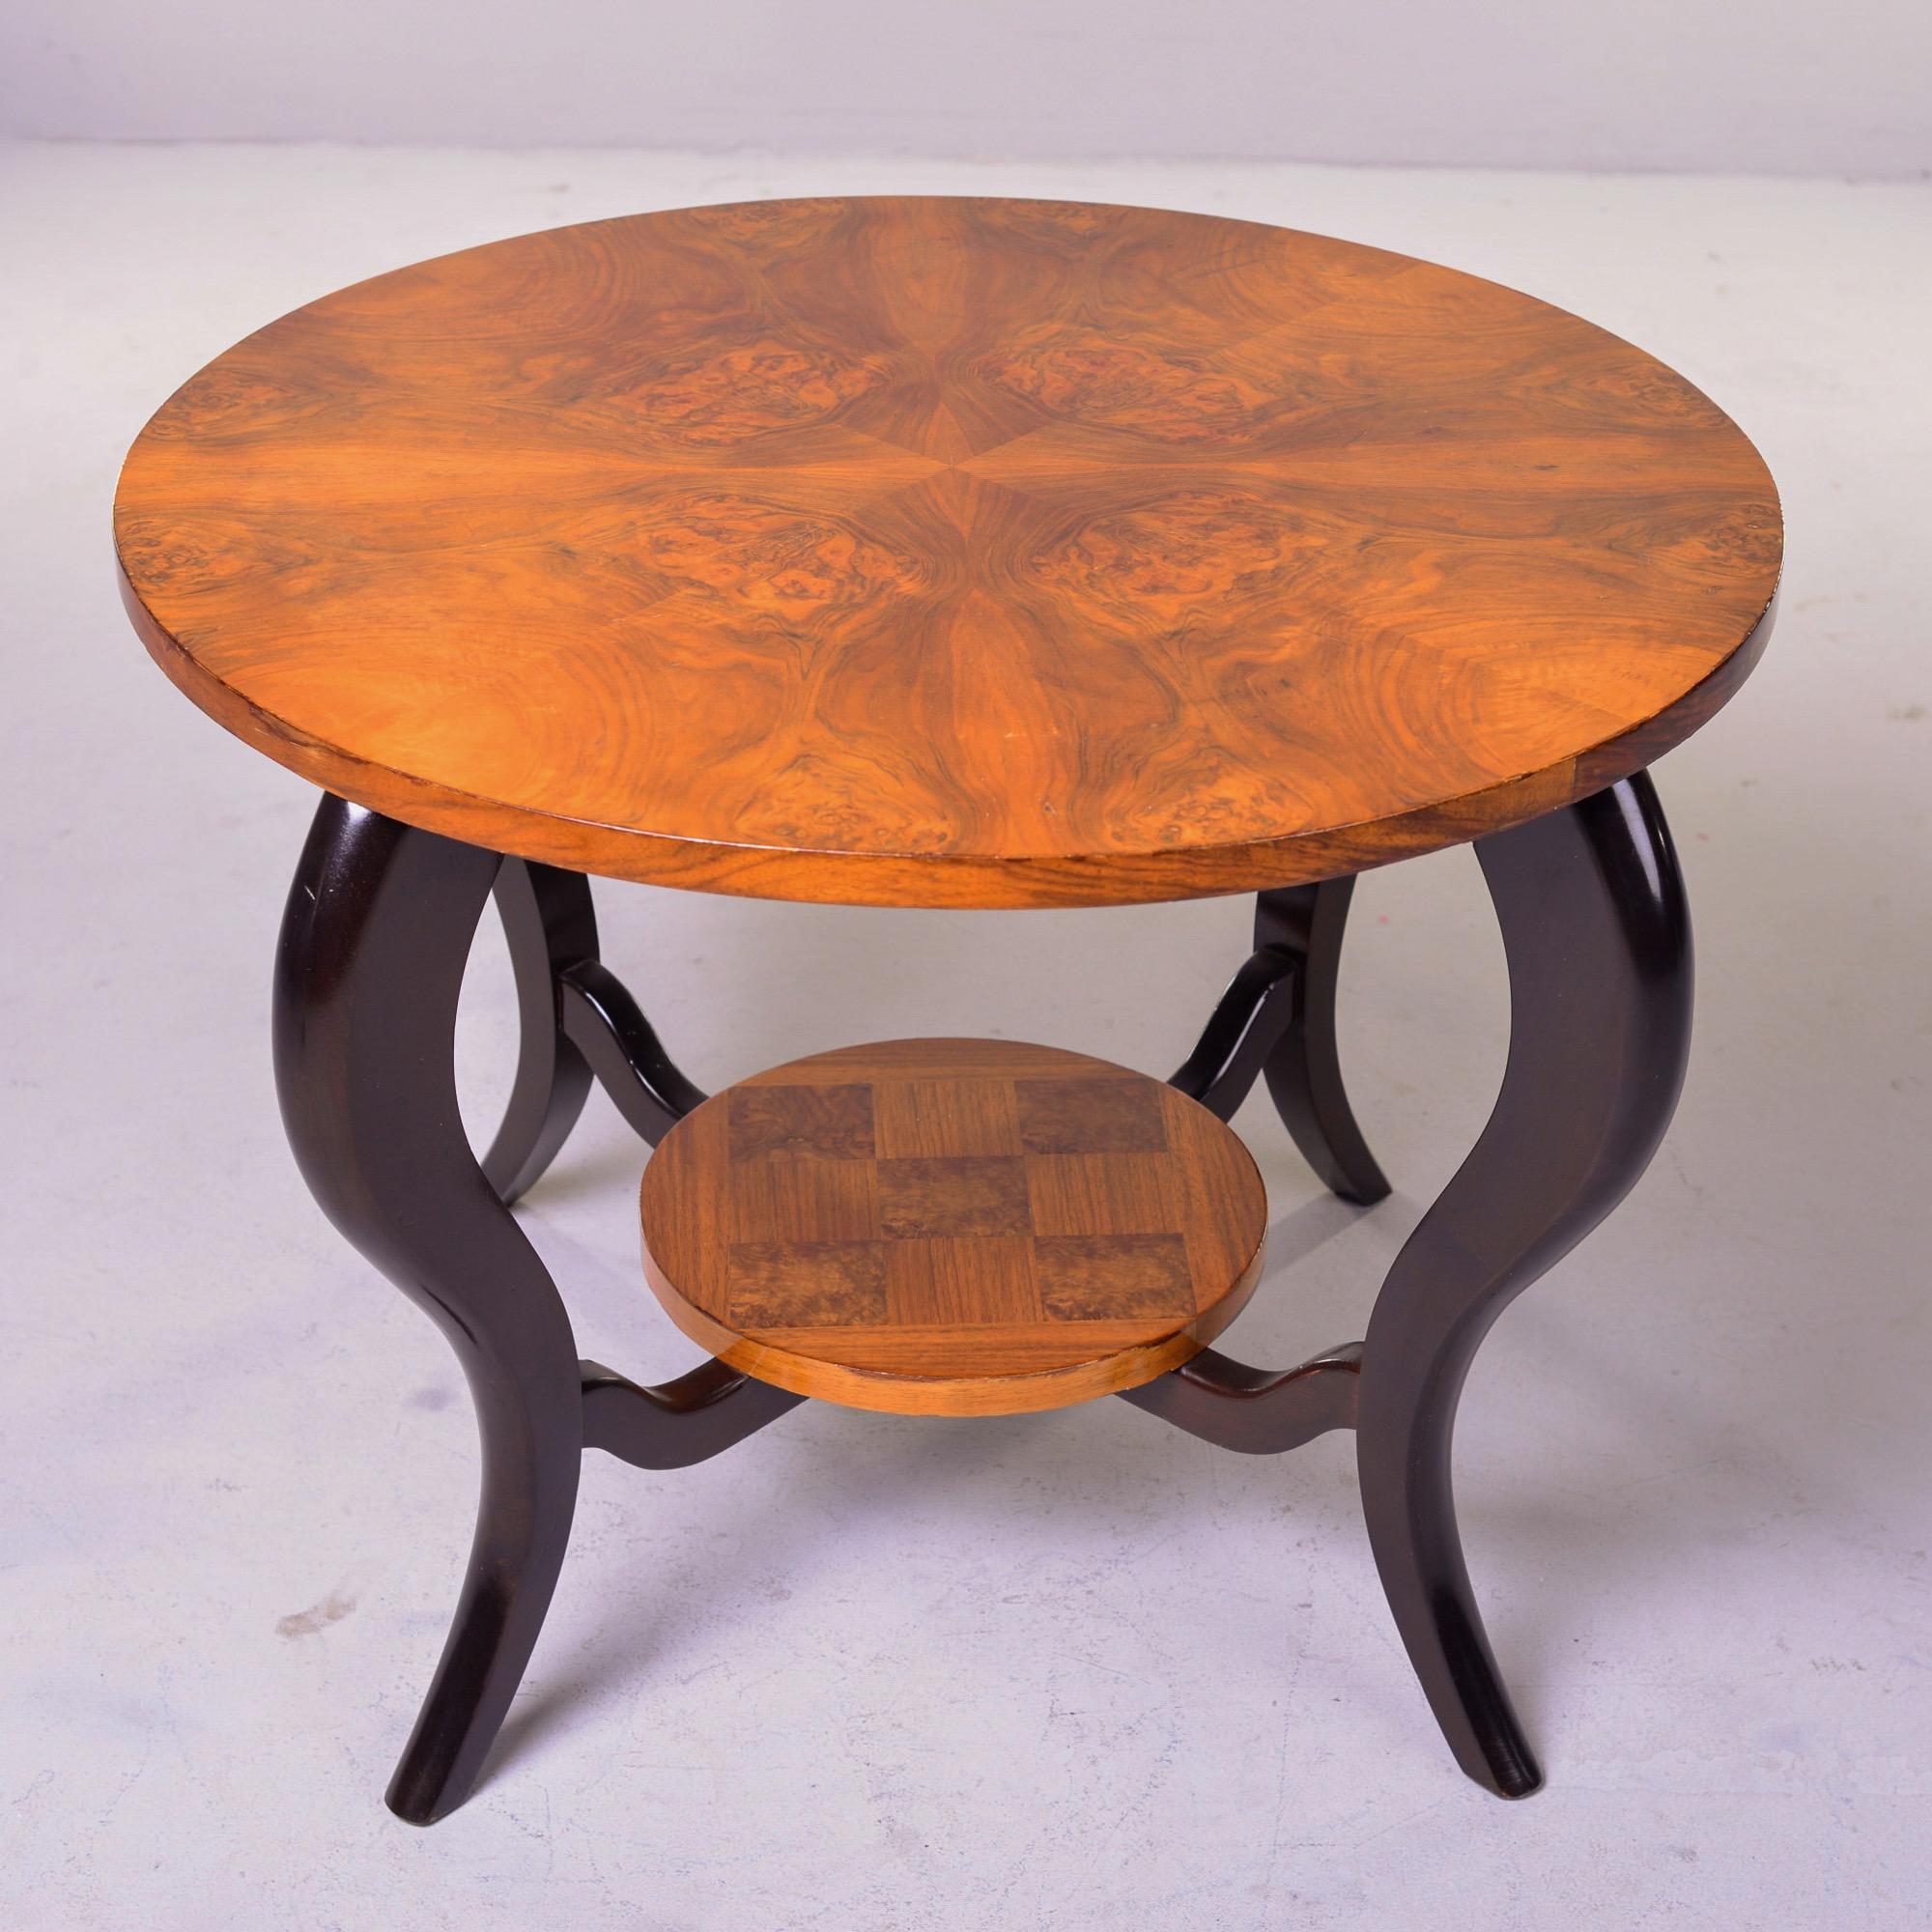 French Art Deco Two Tier Round Burl Wood Table with Black Legs 7